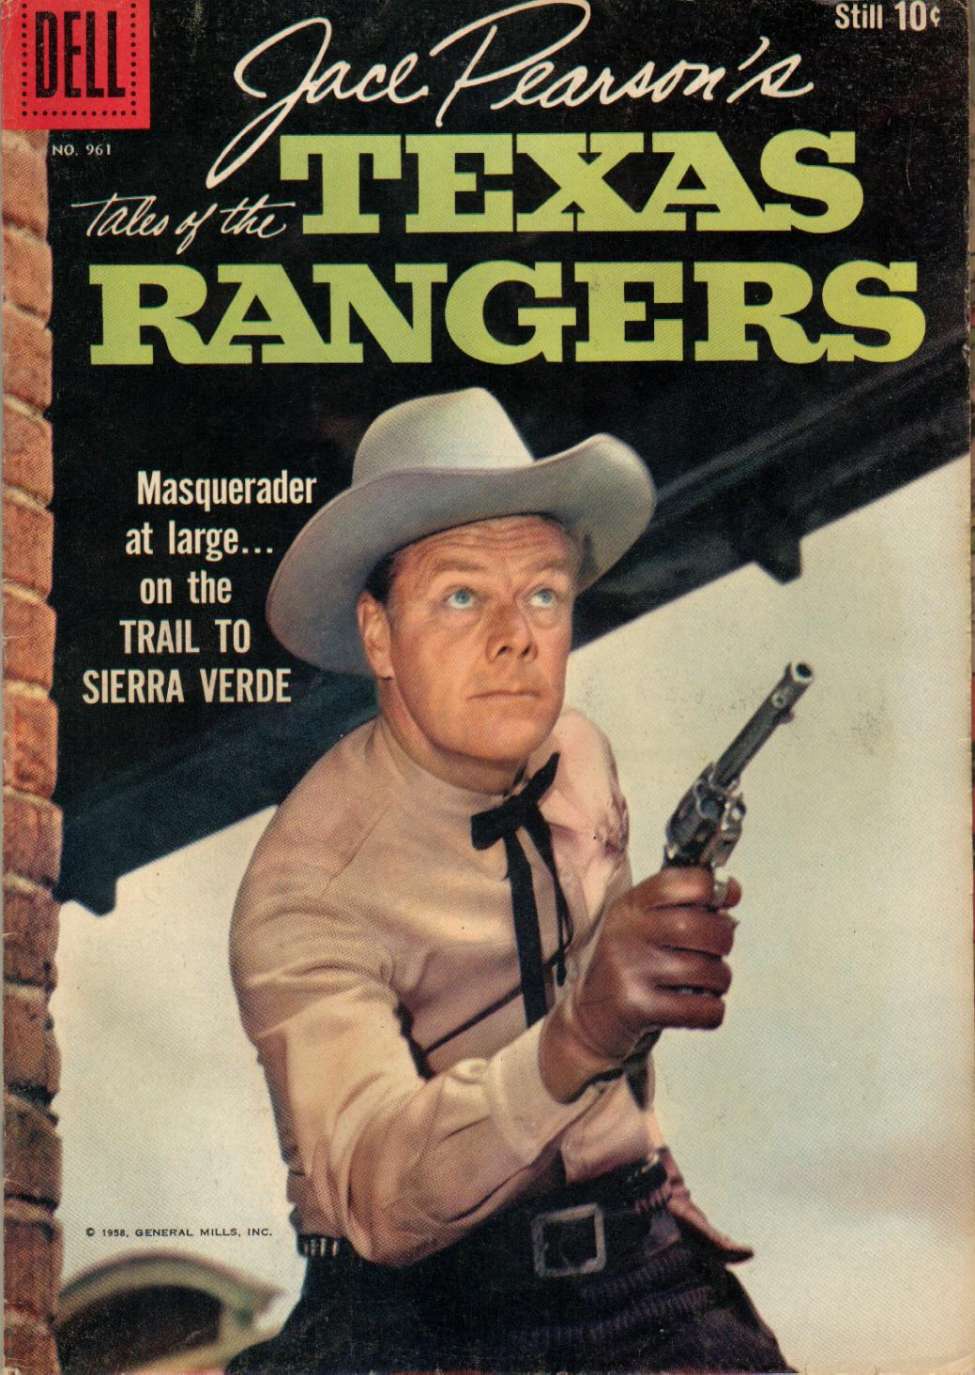 Comic Book Cover For 0961 - Jake Pearson's Tales of the Texas Rangers